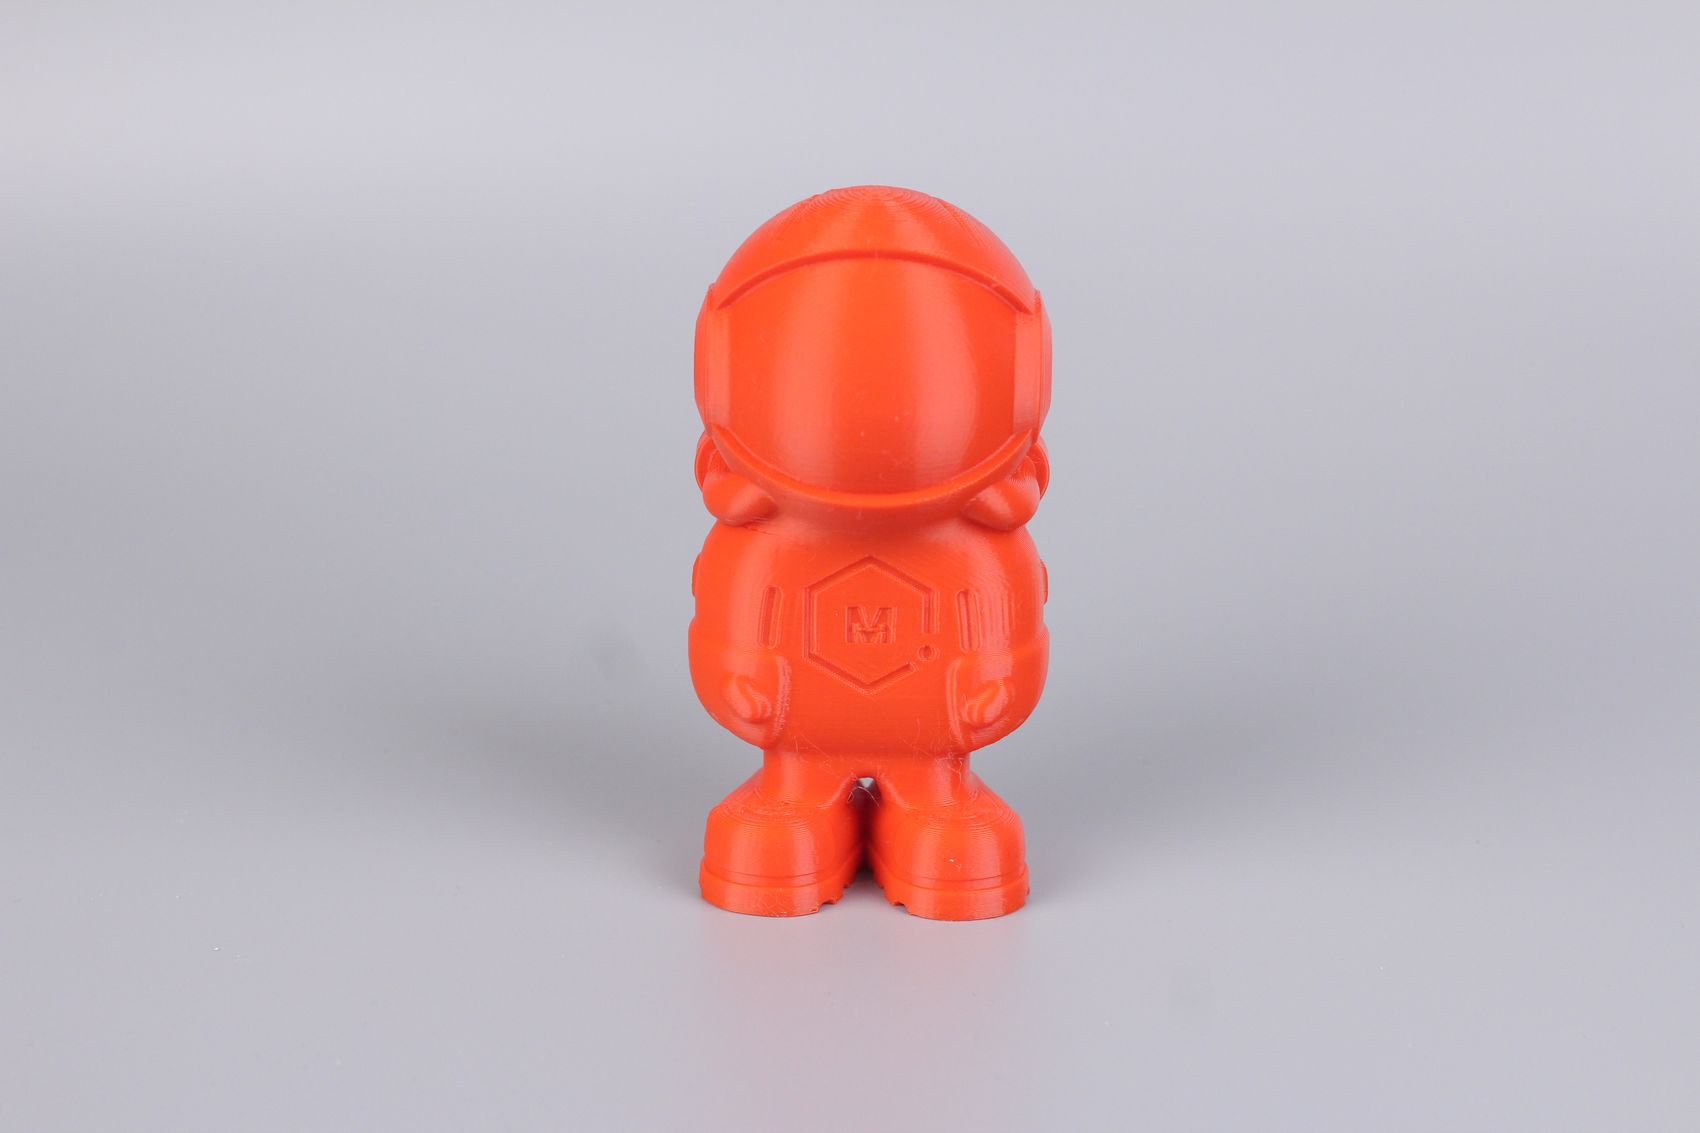 Phil A Ment PLA print on Ender 5 S11 | Creality Ender-5 S1 Review: Is it a worthy upgrade?